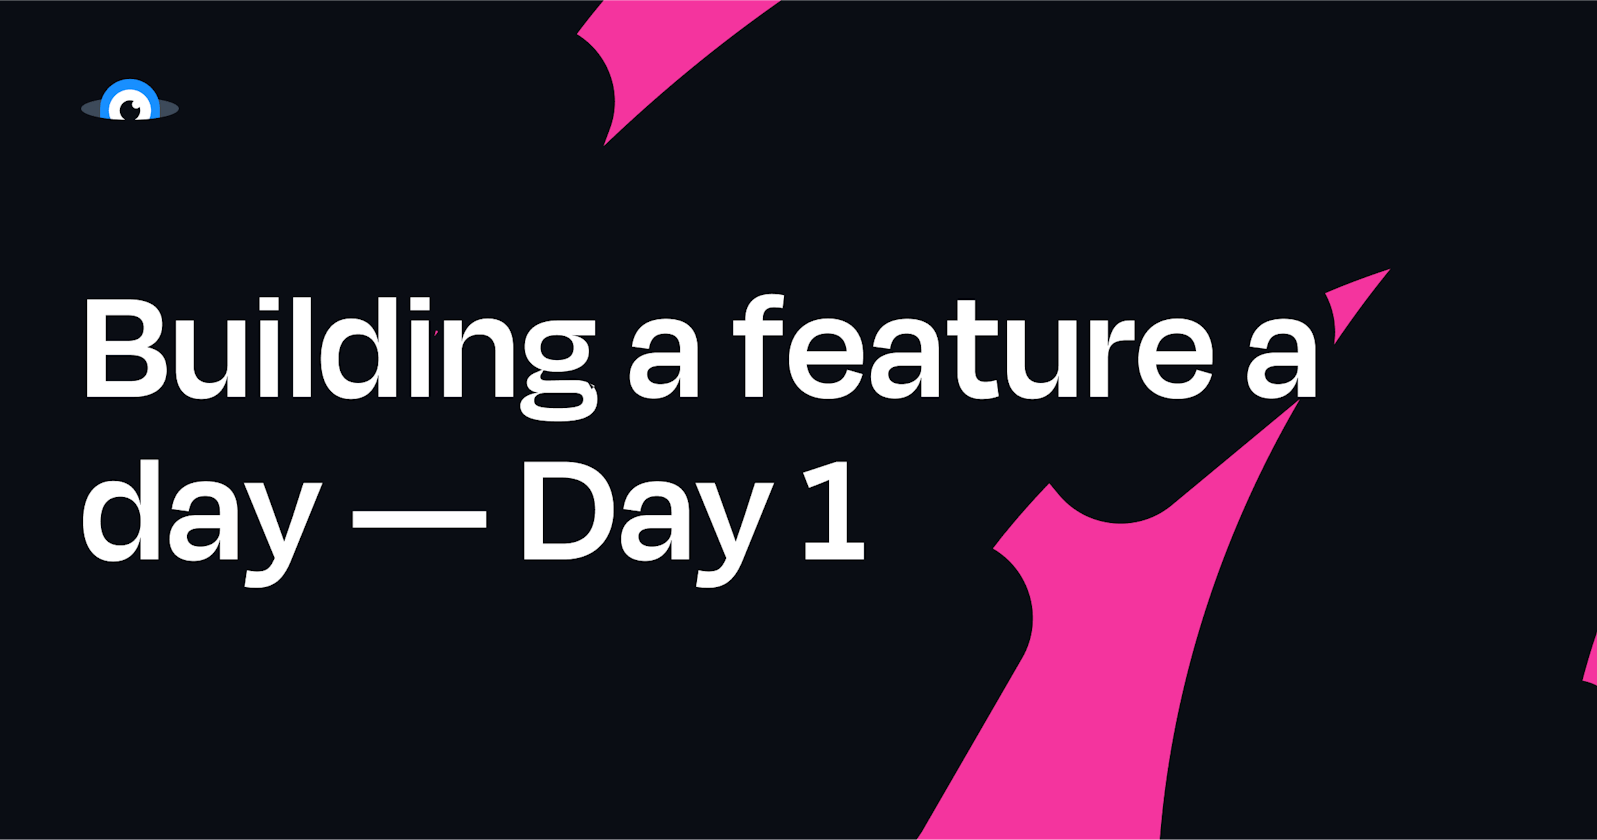 Building a feature a day with Squid - Day 1: Adding data streaming